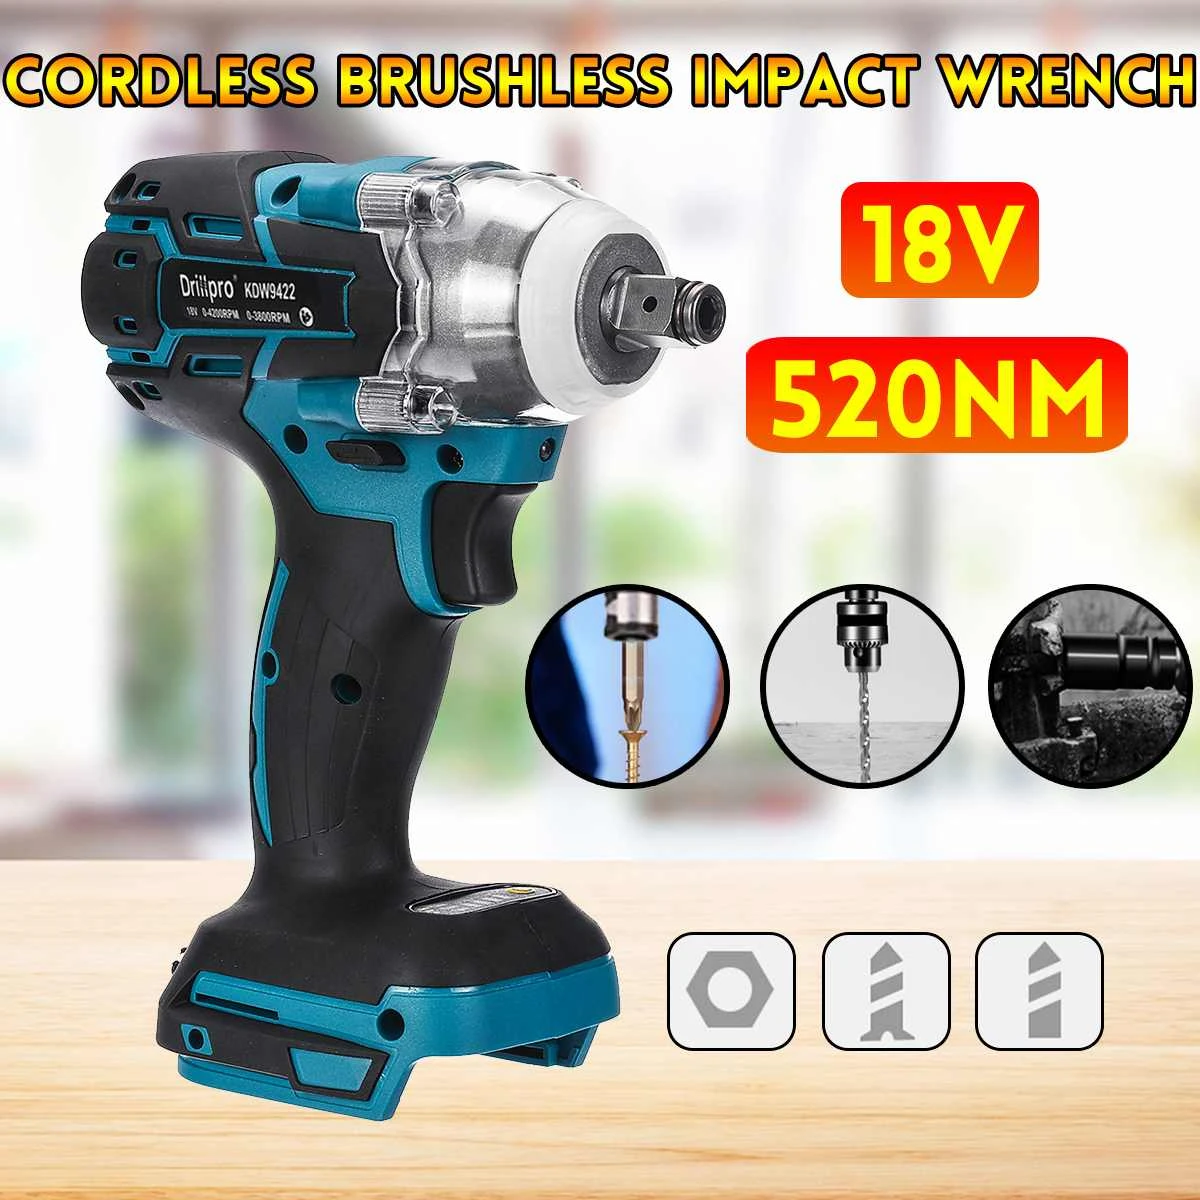 Drillpro Brushless Cordless Electric Impact Wrench Rechargeable 1/2 inch Wrench Power Tools Compatible for Makita 18V Battery cheap heat gun